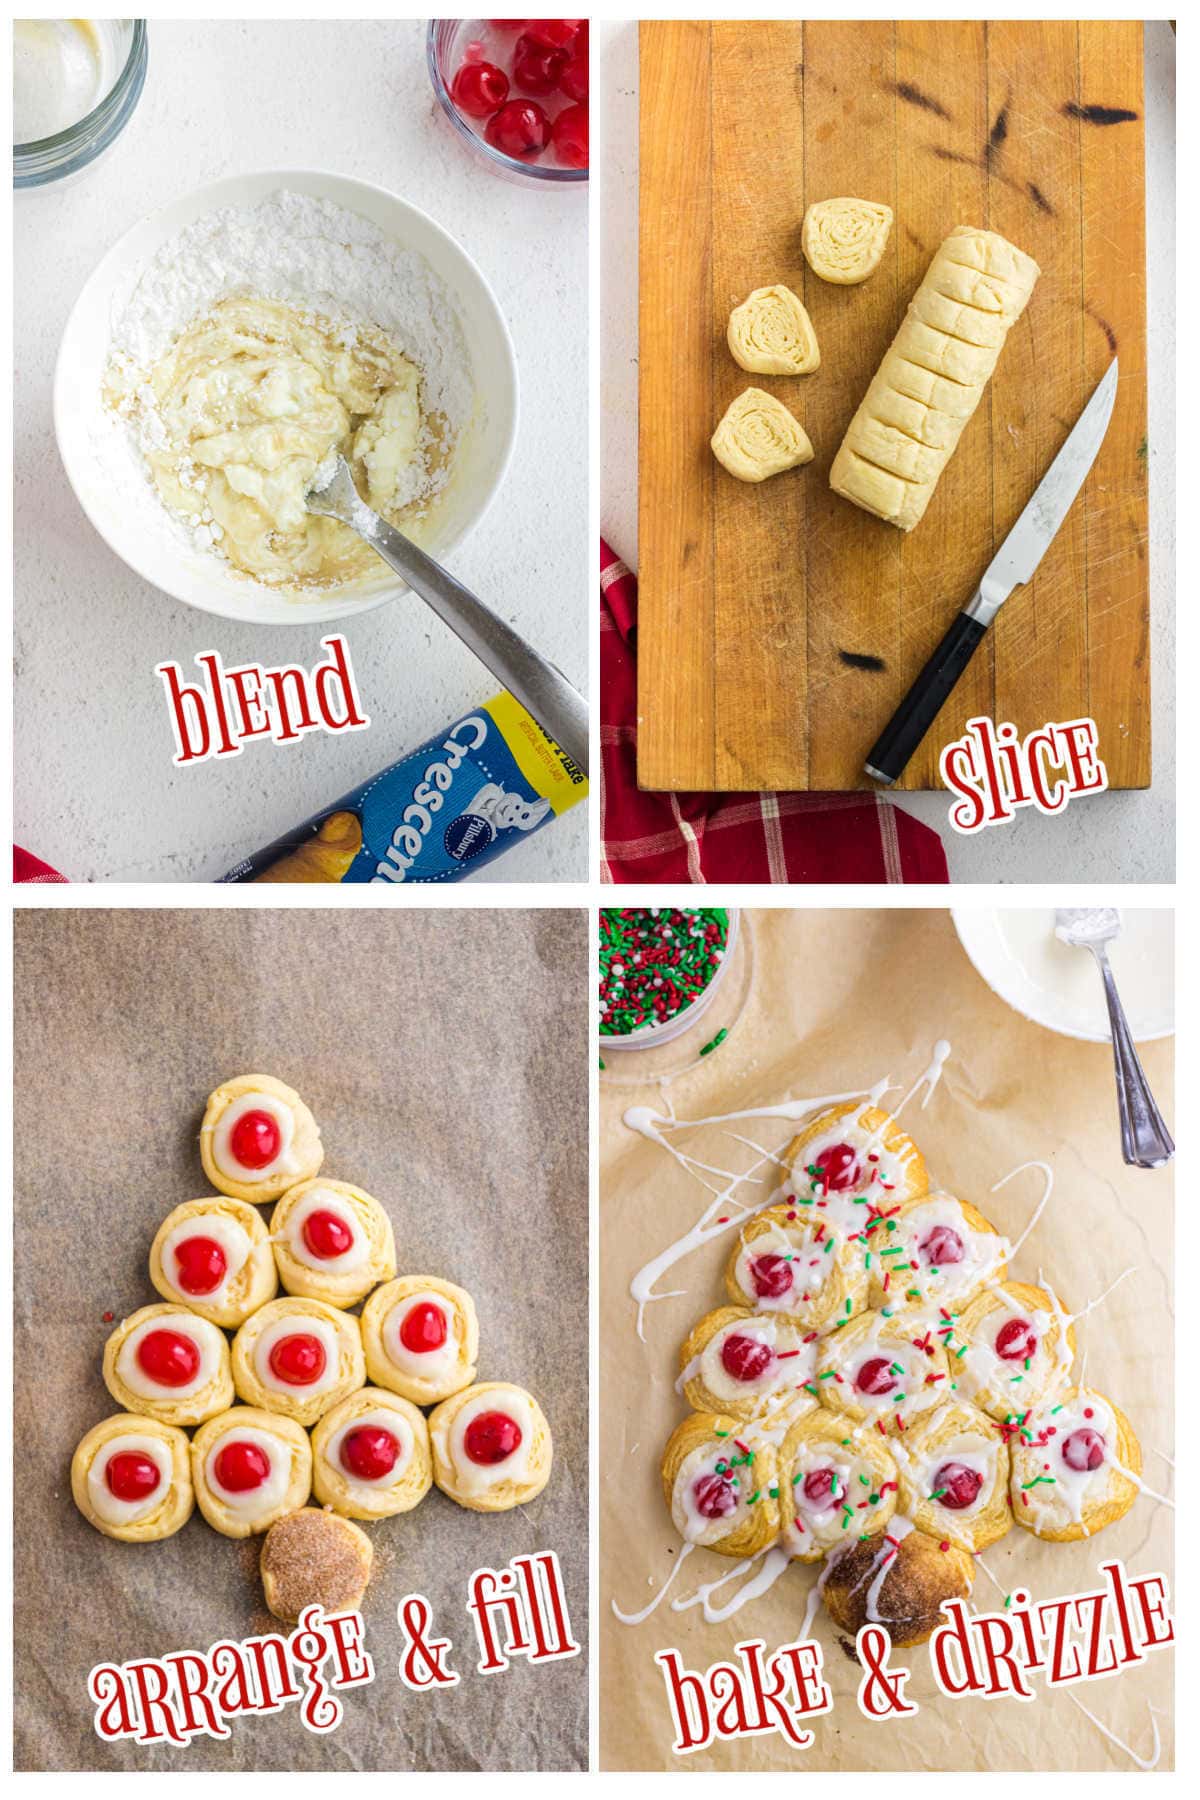 Step by step images showing how to make these cream cheese danish.